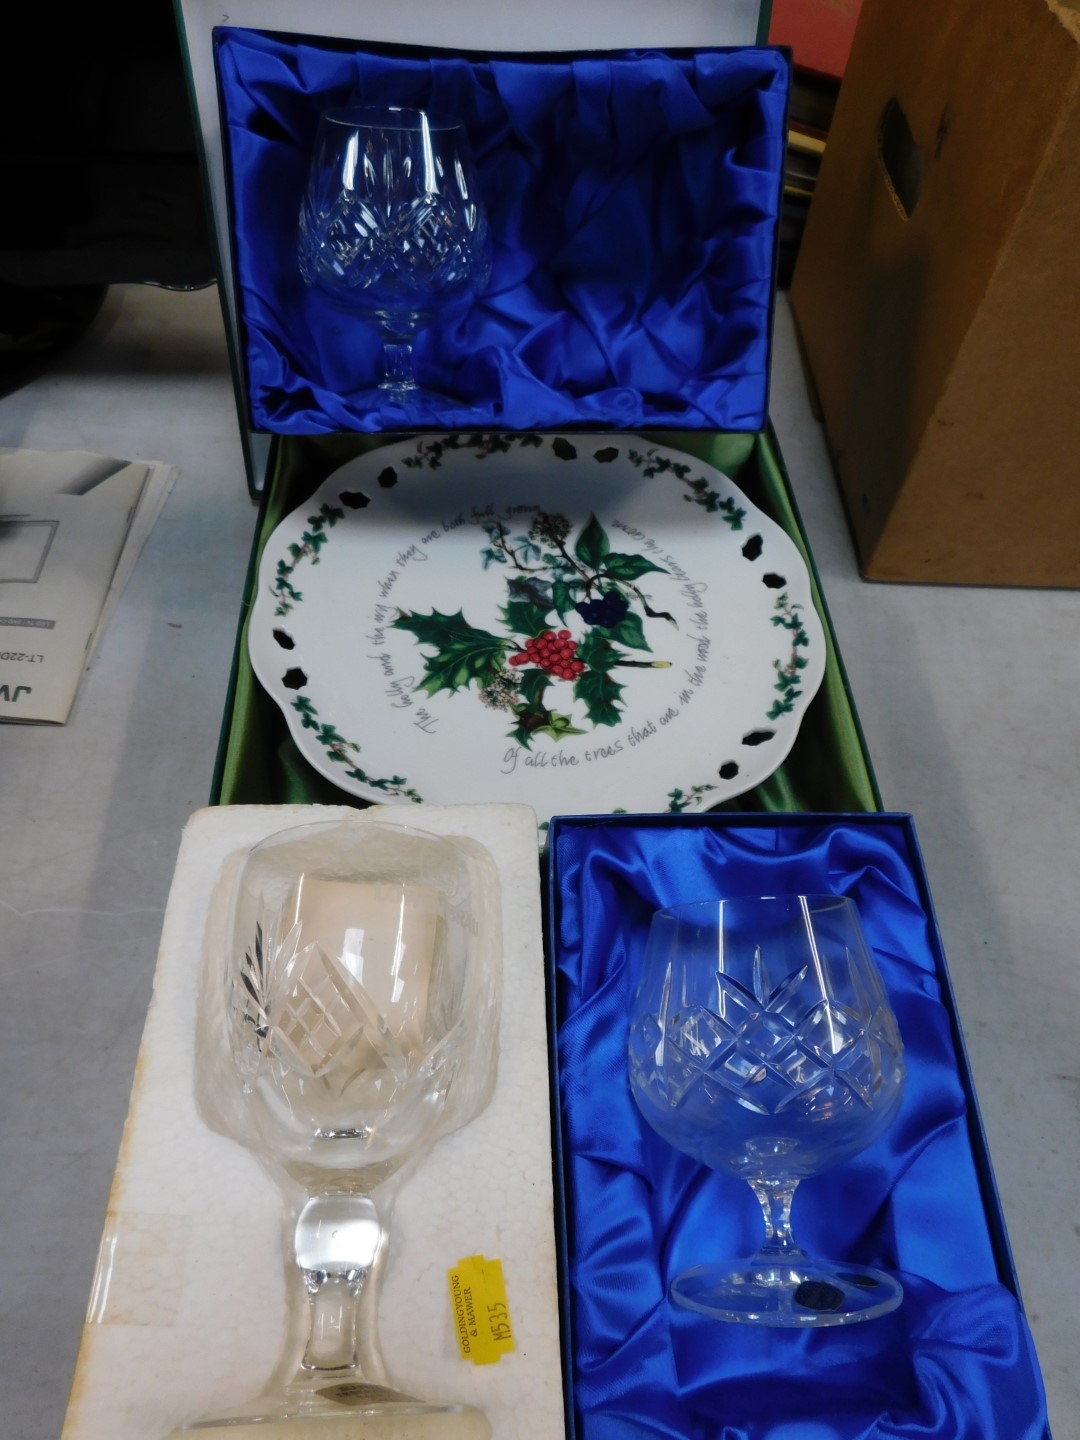 A Portmeirion The Holly and The Ivy Christmas cake tazza, Lowenbrau beer glass, etc. (a quantity) - Image 2 of 2